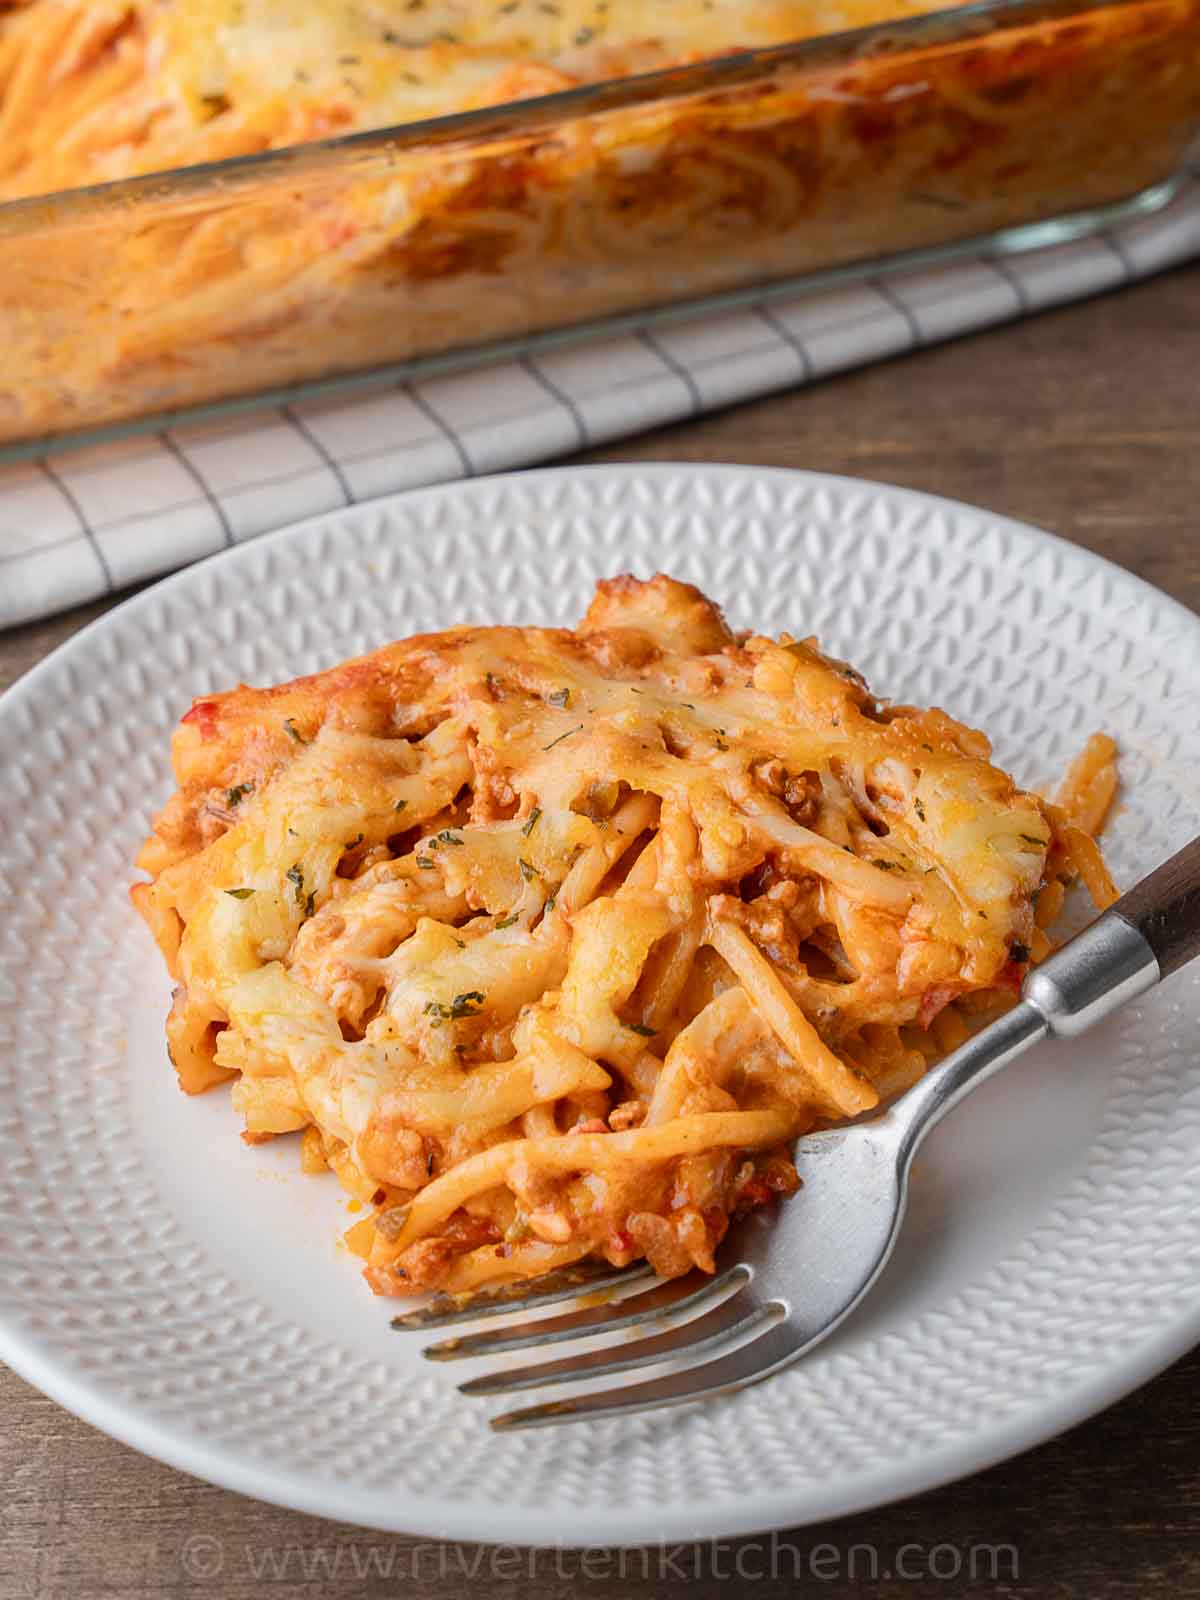 oven baked spaghetti on a plate.